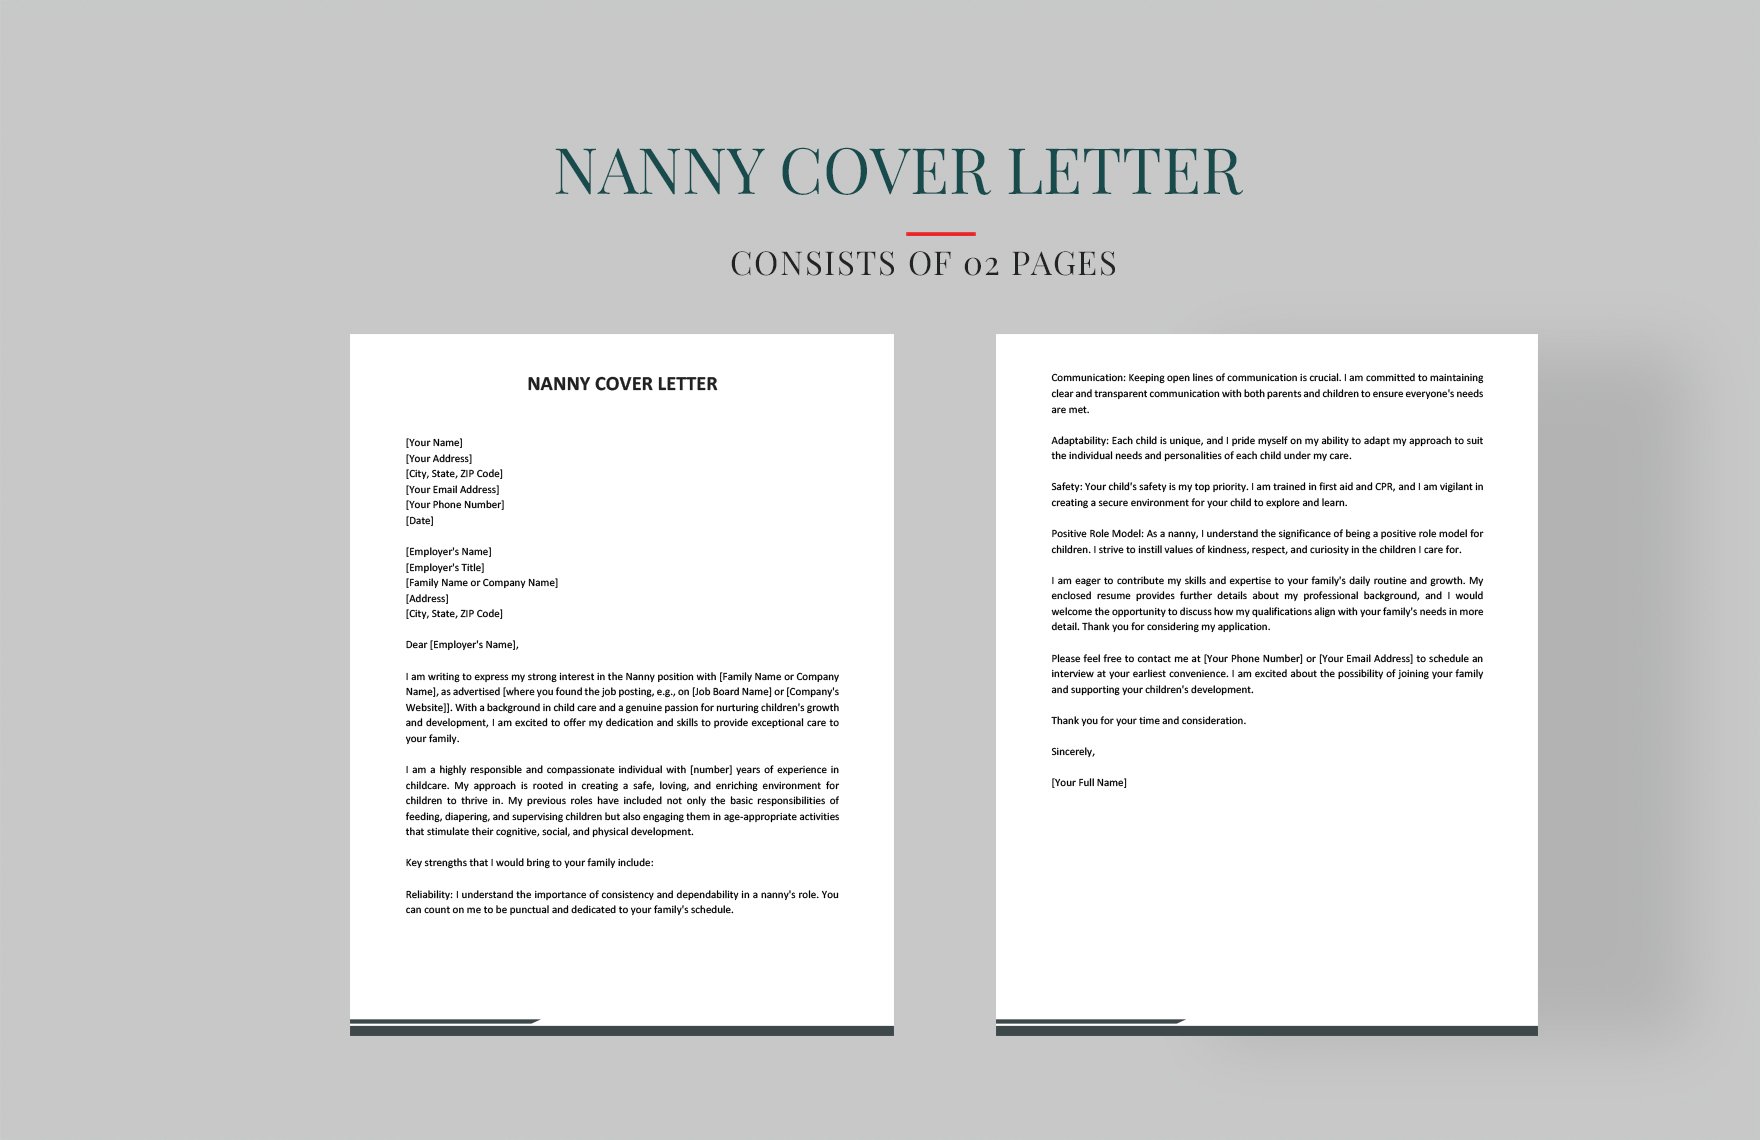 Nanny Cover Letter in Word, Google Docs, PDF